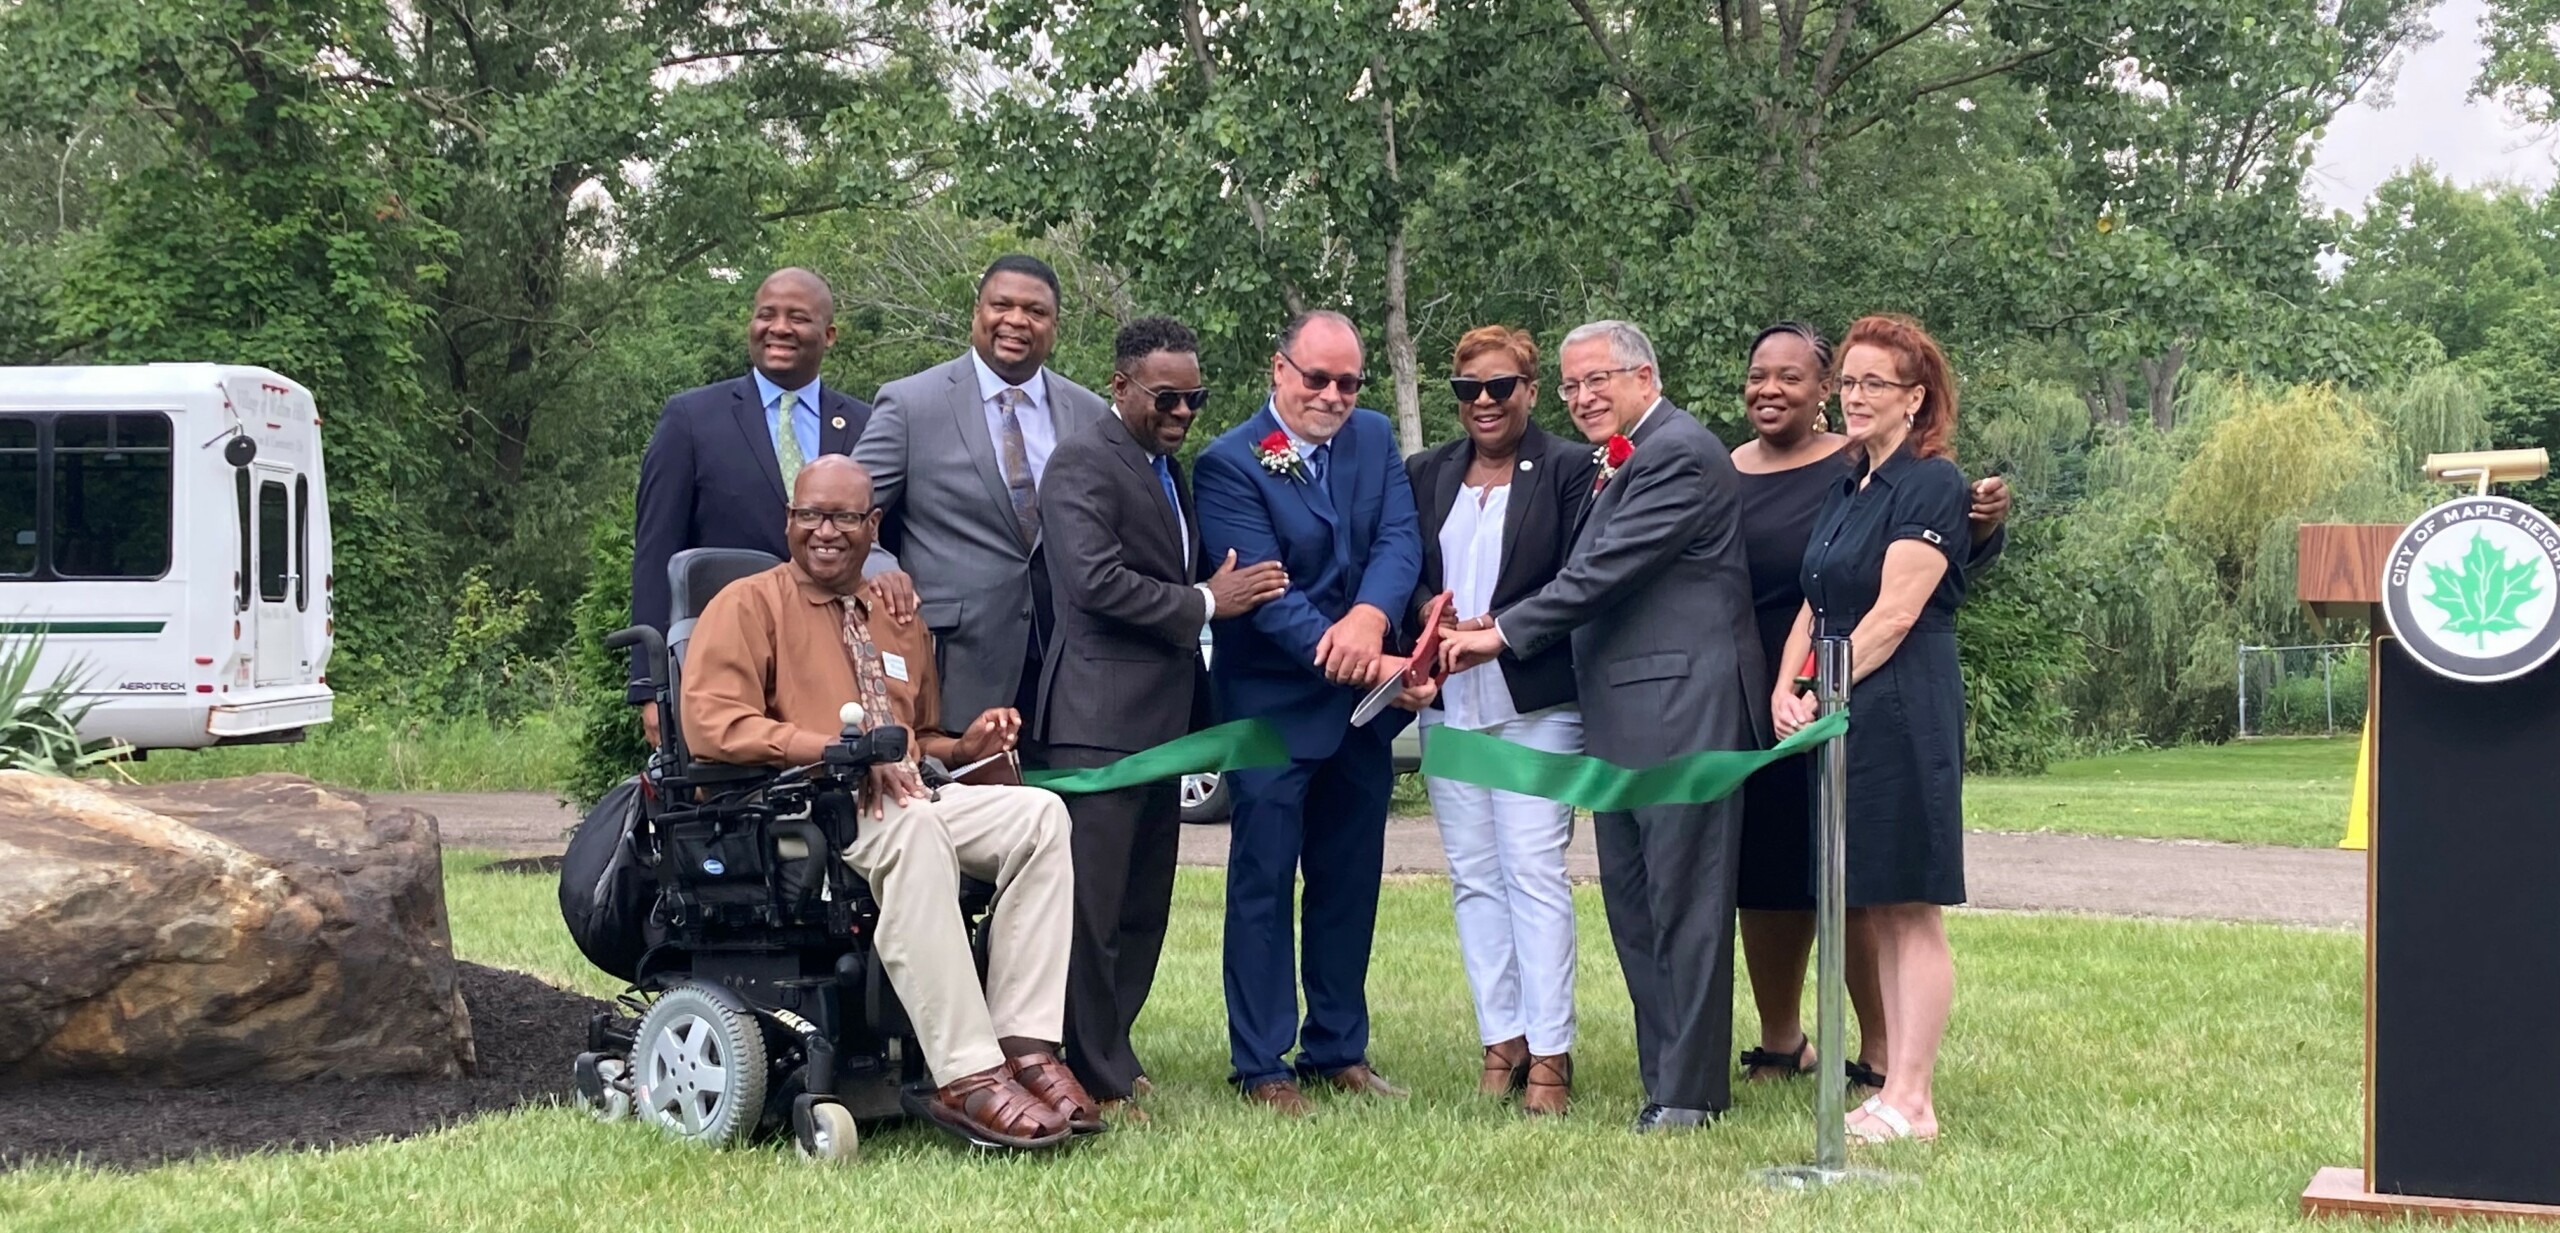 Mayor Blackwell of Maple Heights and Mayor Kolograf of Walton Hills along with other elected officials cut ribbon on July 30, 2021.